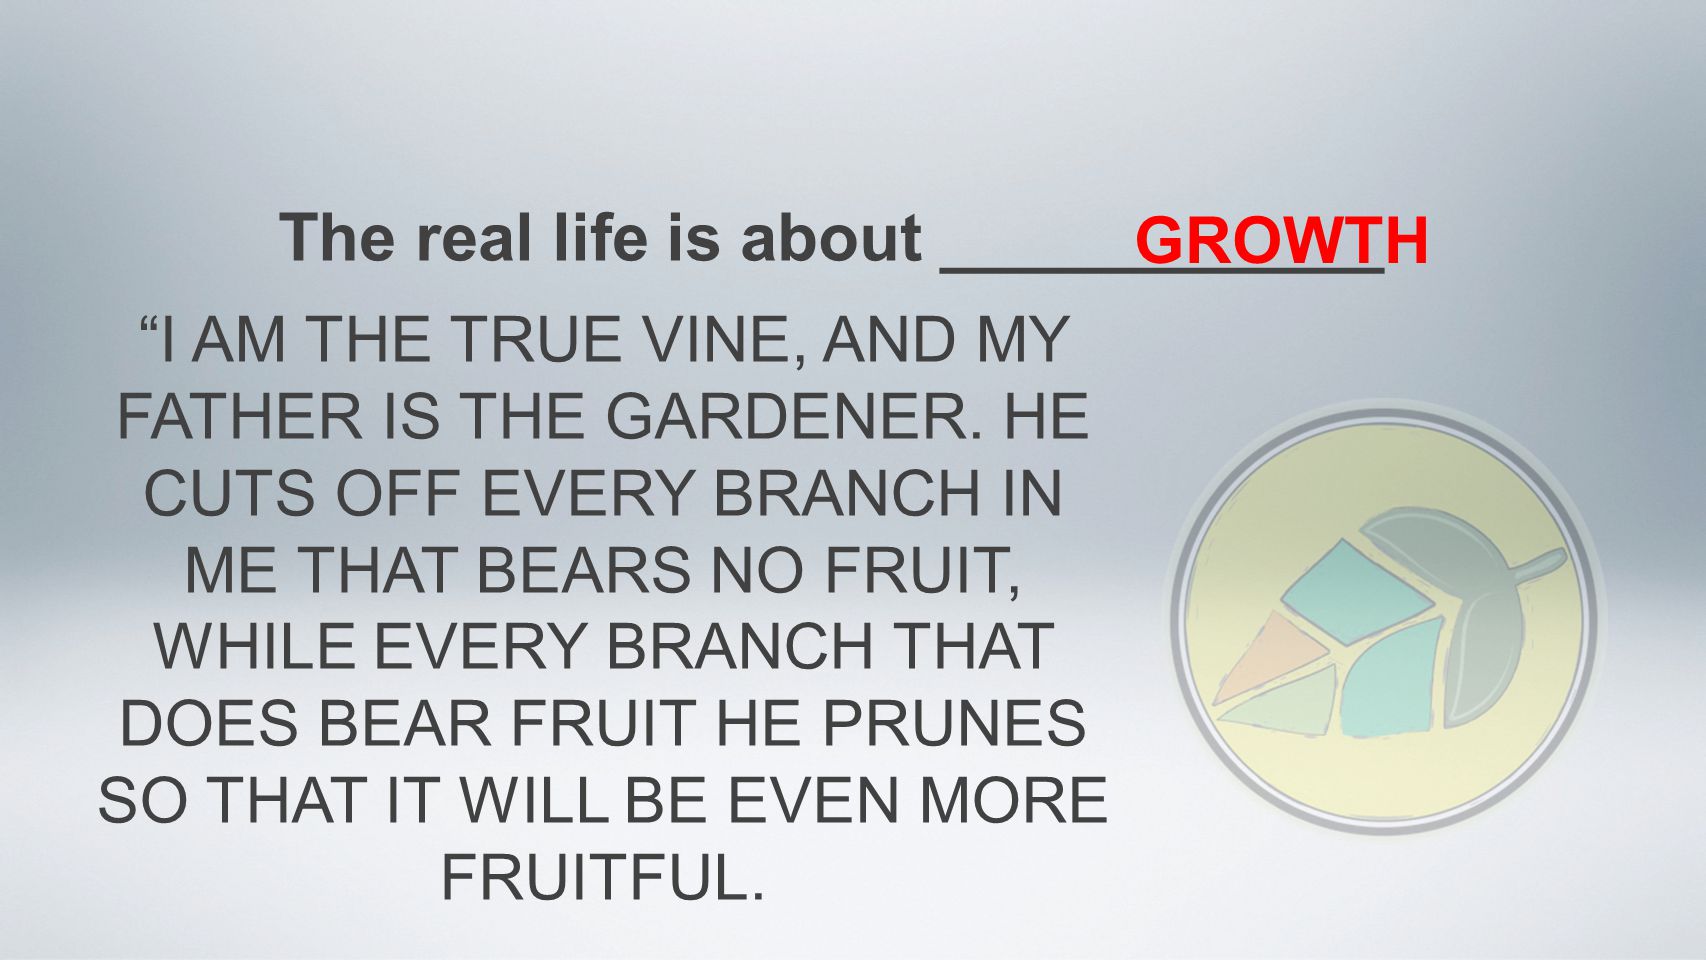 The real life is about ____________ GROWTH I AM THE TRUE VINE, AND MY FATHER IS THE GARDENER.